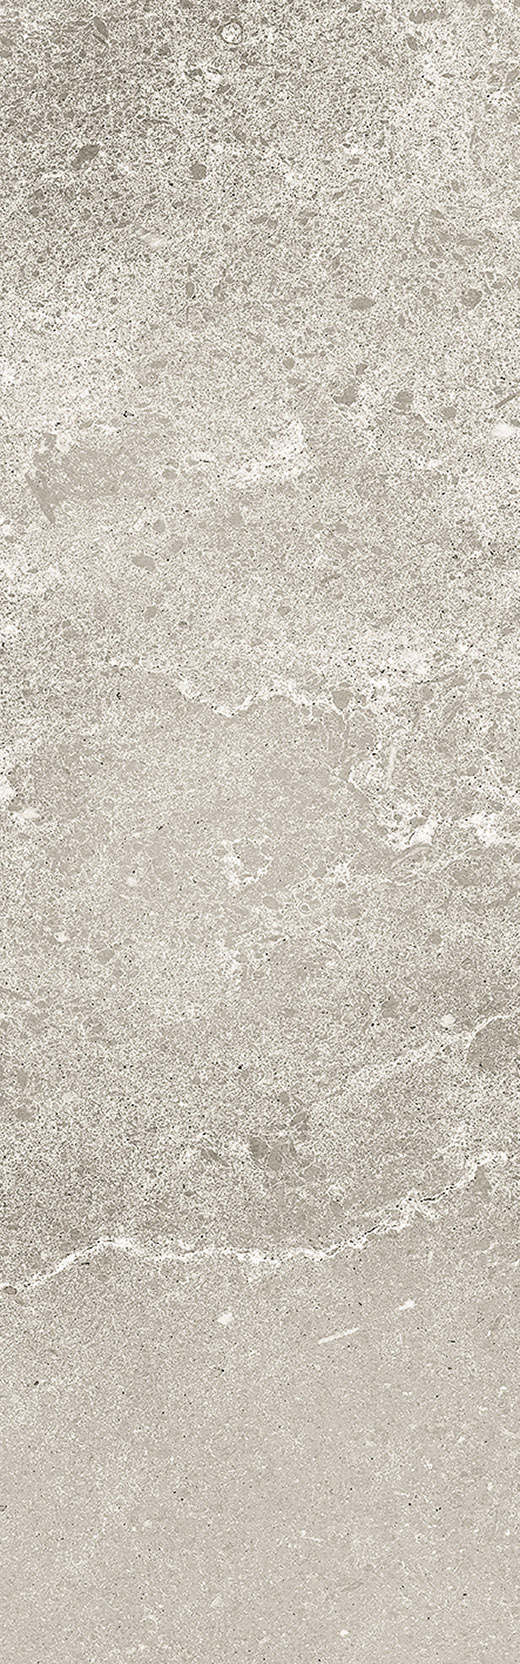 Outlet Majesty Grigio Chiaro Natural 5"x16 | Glazed Porcelain | Floor/Wall Tile